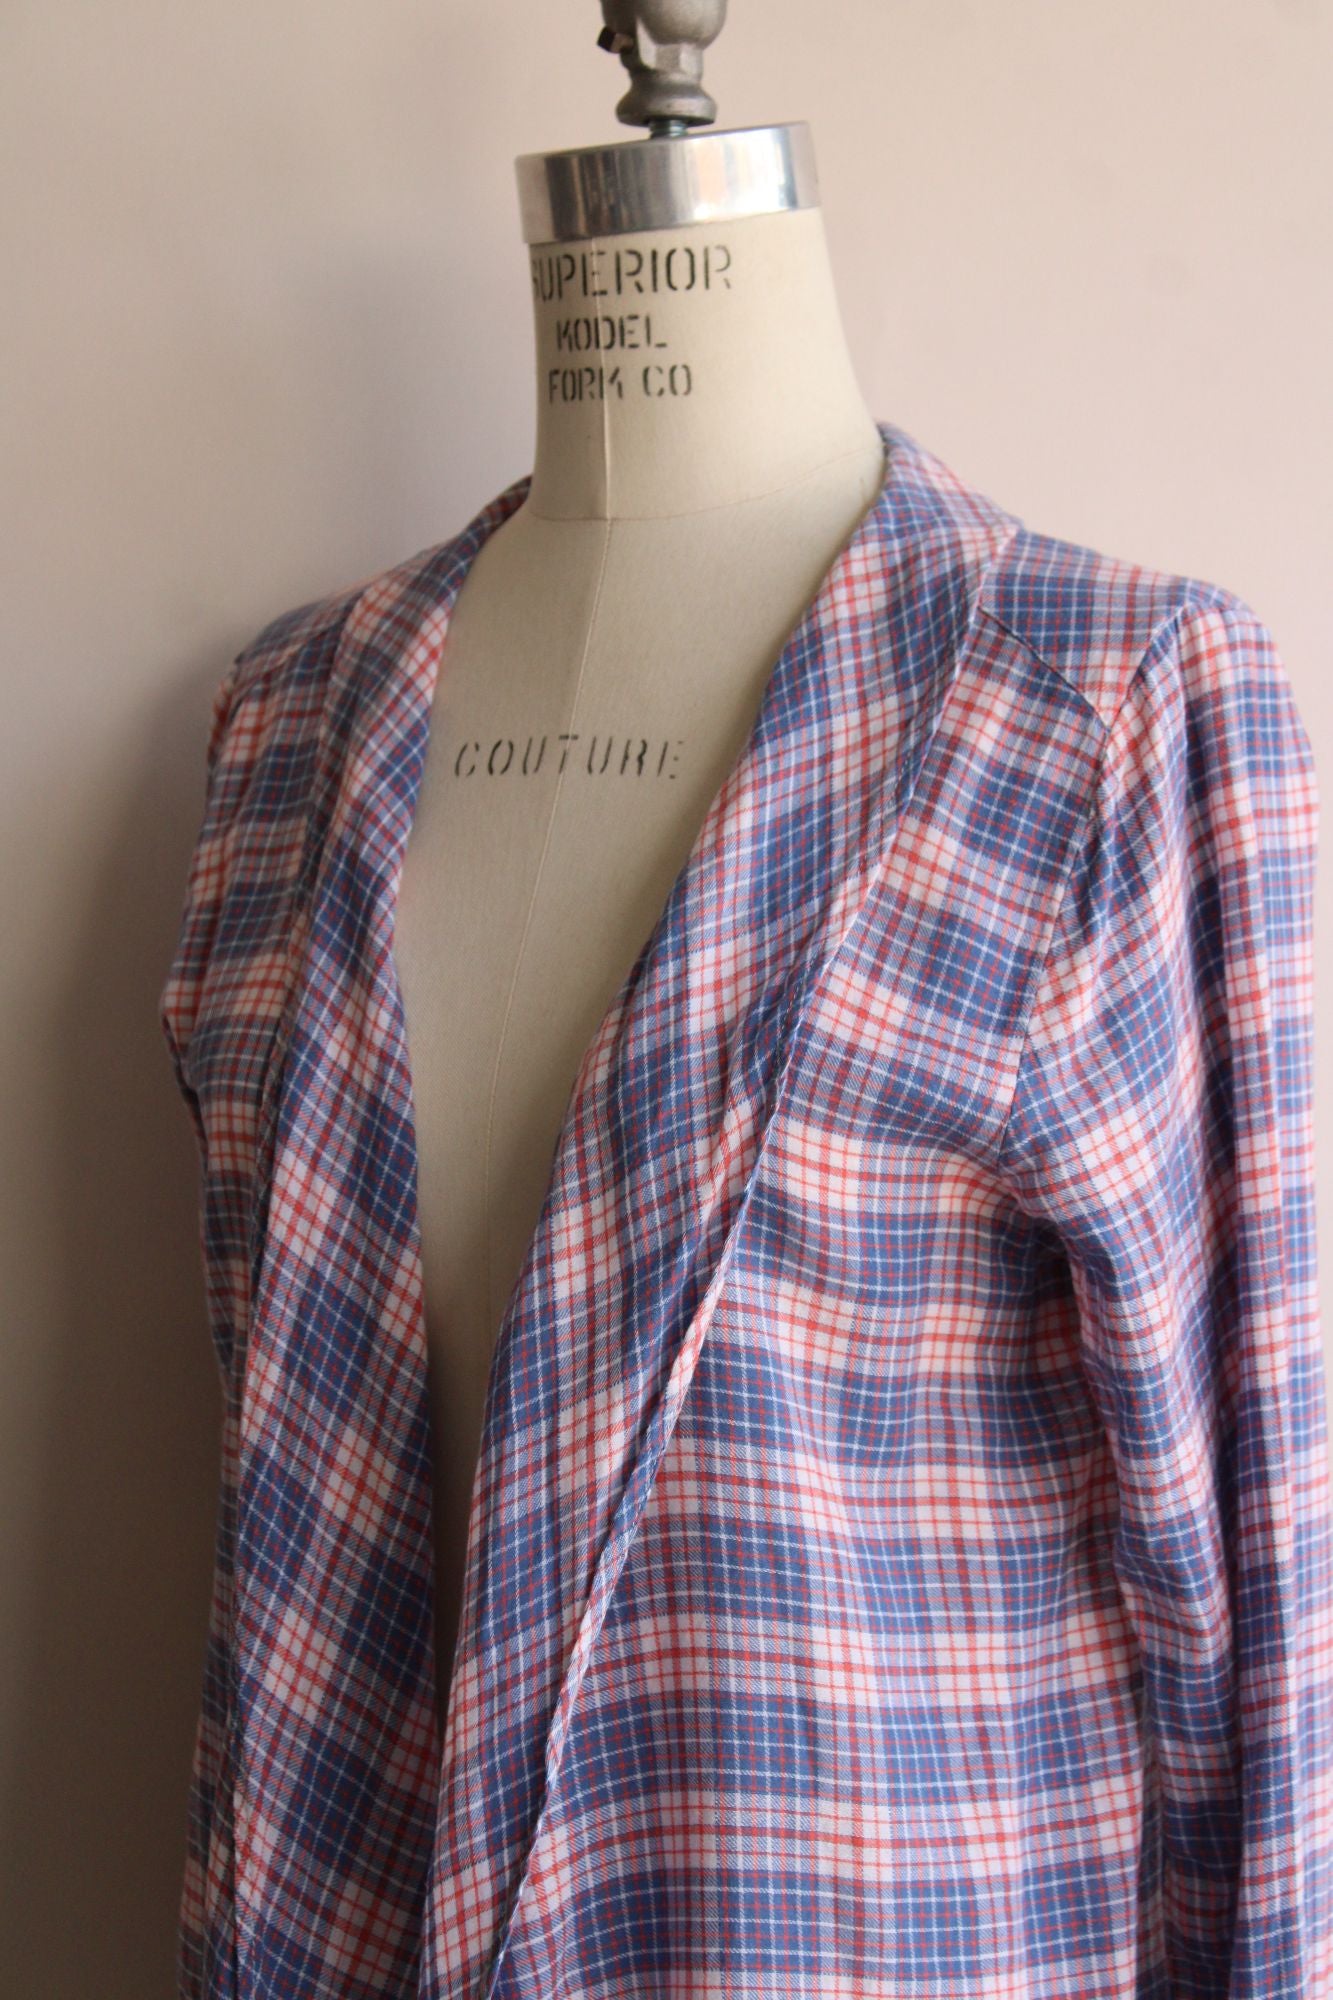 Divided Plaid Shirt, size 10, blue red and white tartan, open front, long sleeve